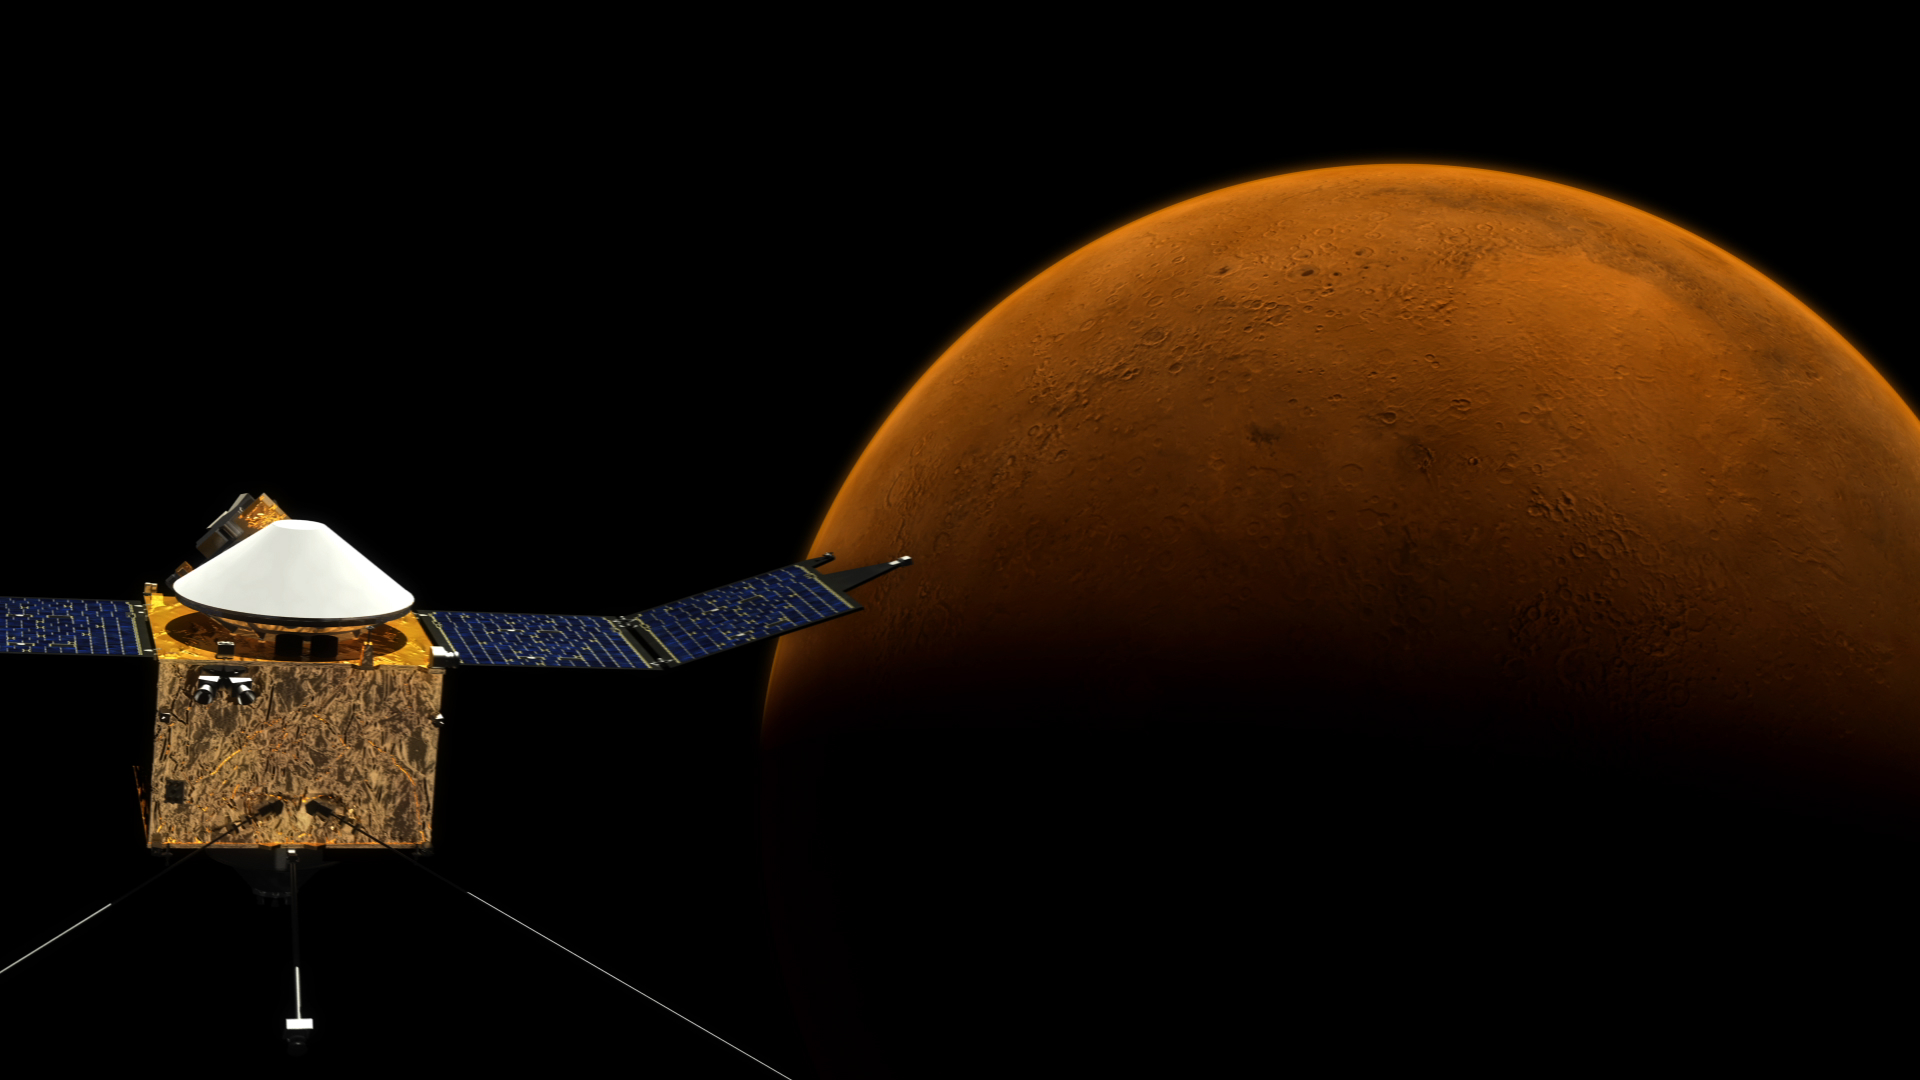 LEAD: NASA’s MAVEN satellite is still on track flying to Mars to help answer questions about why our sister planet is so much different than Earth.  1. Four billion years ago, Mars may have looked like Earth. 2. But where did Mars's water and atmosphere go? 3. Earth's powerful magnetic field protects us from the solar wind. 4. On Mars there is NO north-south magnetic field to deflect solar energy. Scientists suspect the Martian atmosphere was stripped away by the solar wind. TAG: MAVEN is traveling at 65,000 miles an hour, taking 10 months before arriving at Mars in September 2014.